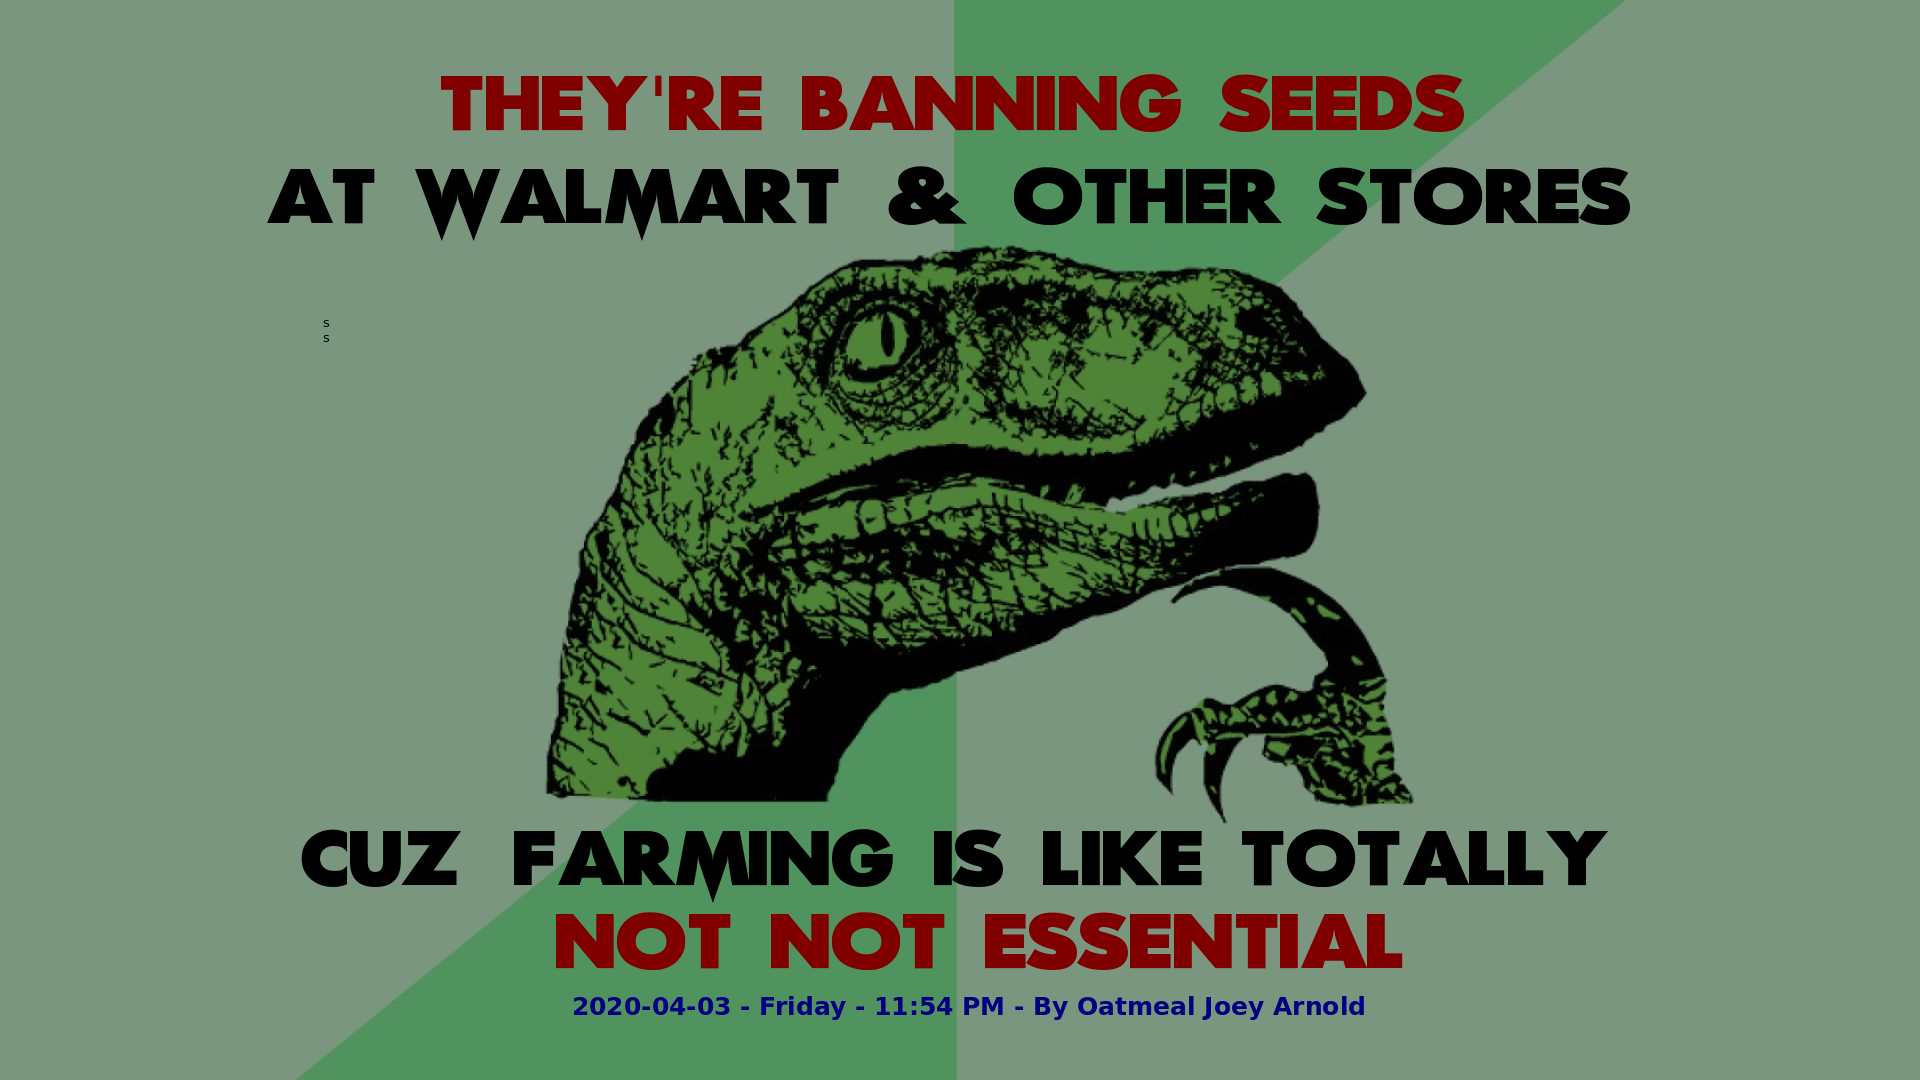 Philosophy Dinosaur They're banning seeds at Walmart & other stores, cuz farming is like totally not not essential.png